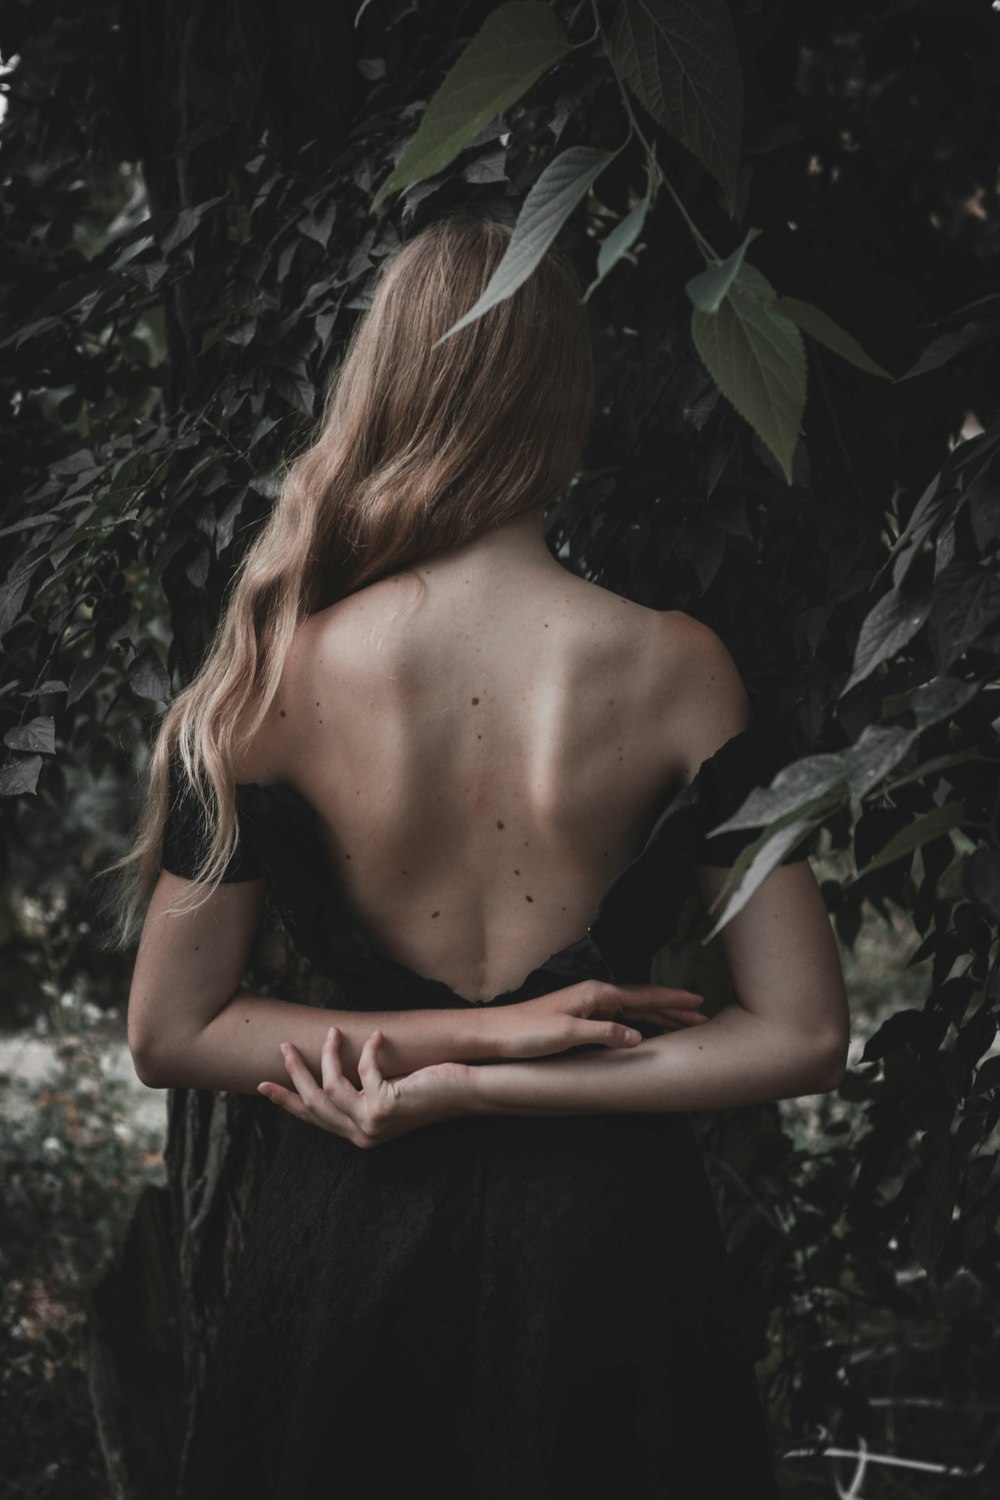 blonde woman with backless dress in forest surrounded by leaves